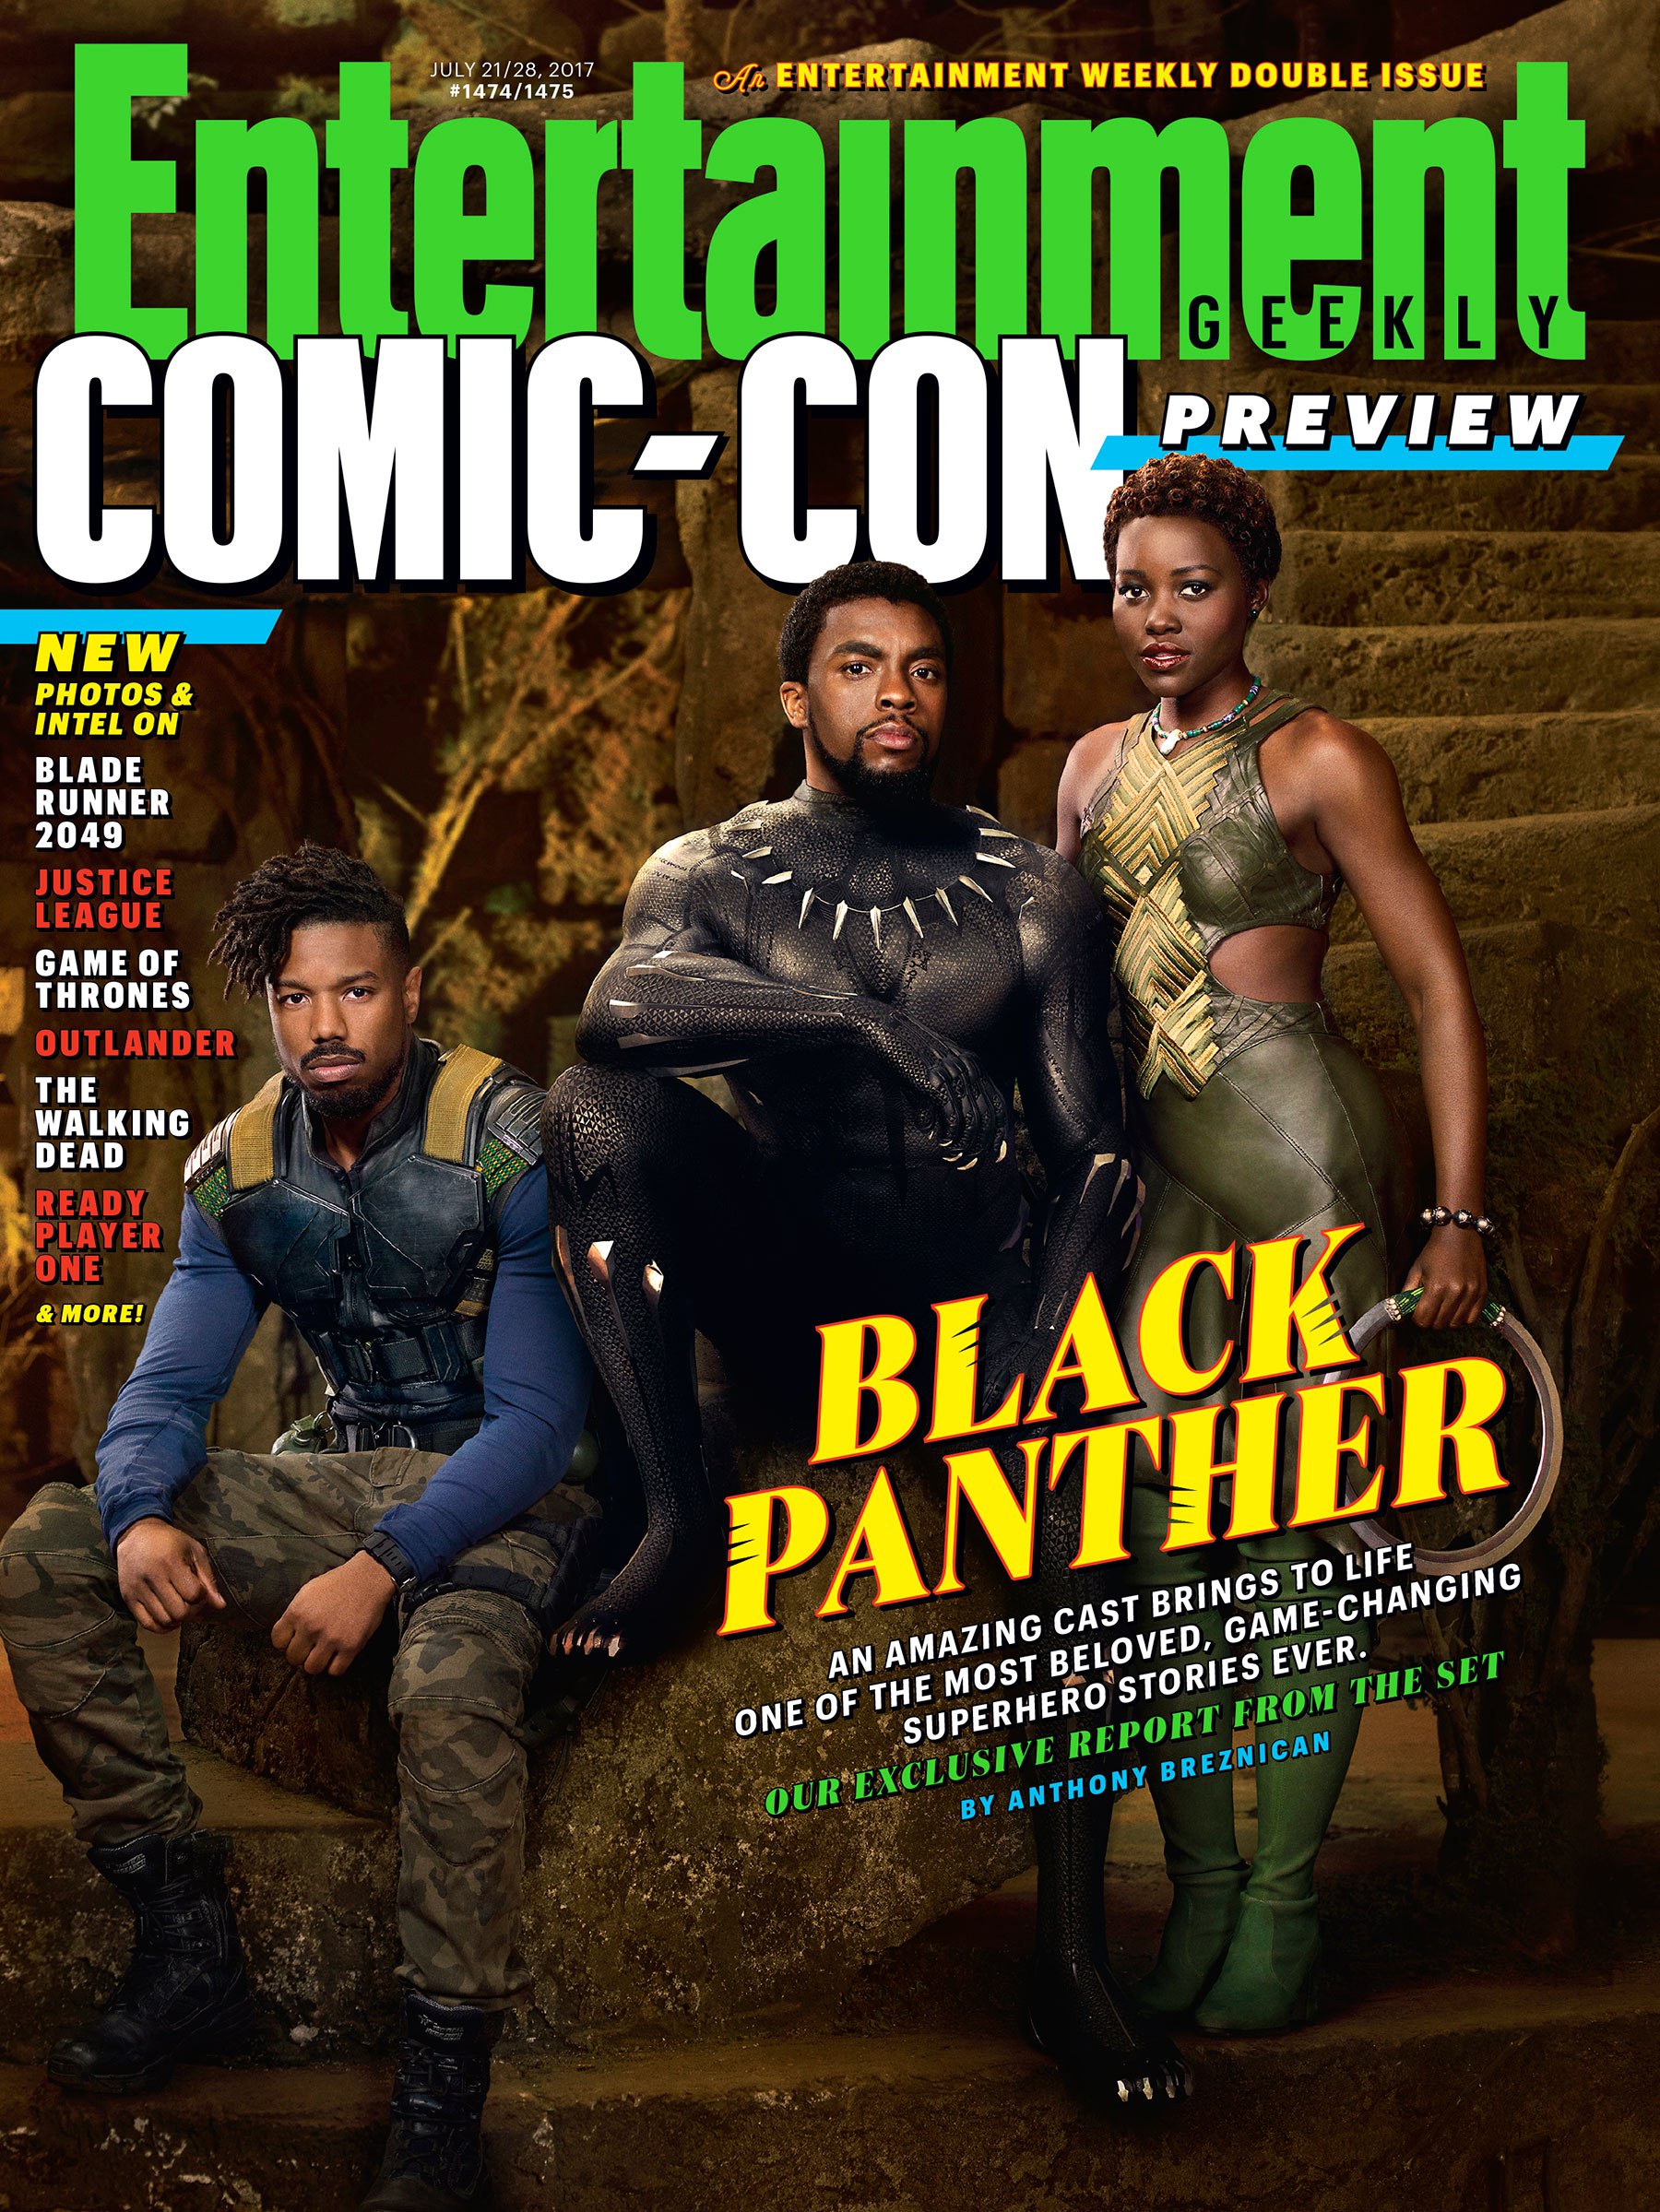 Black Panther Entertainment Weekly Cover July 21-28, 2017